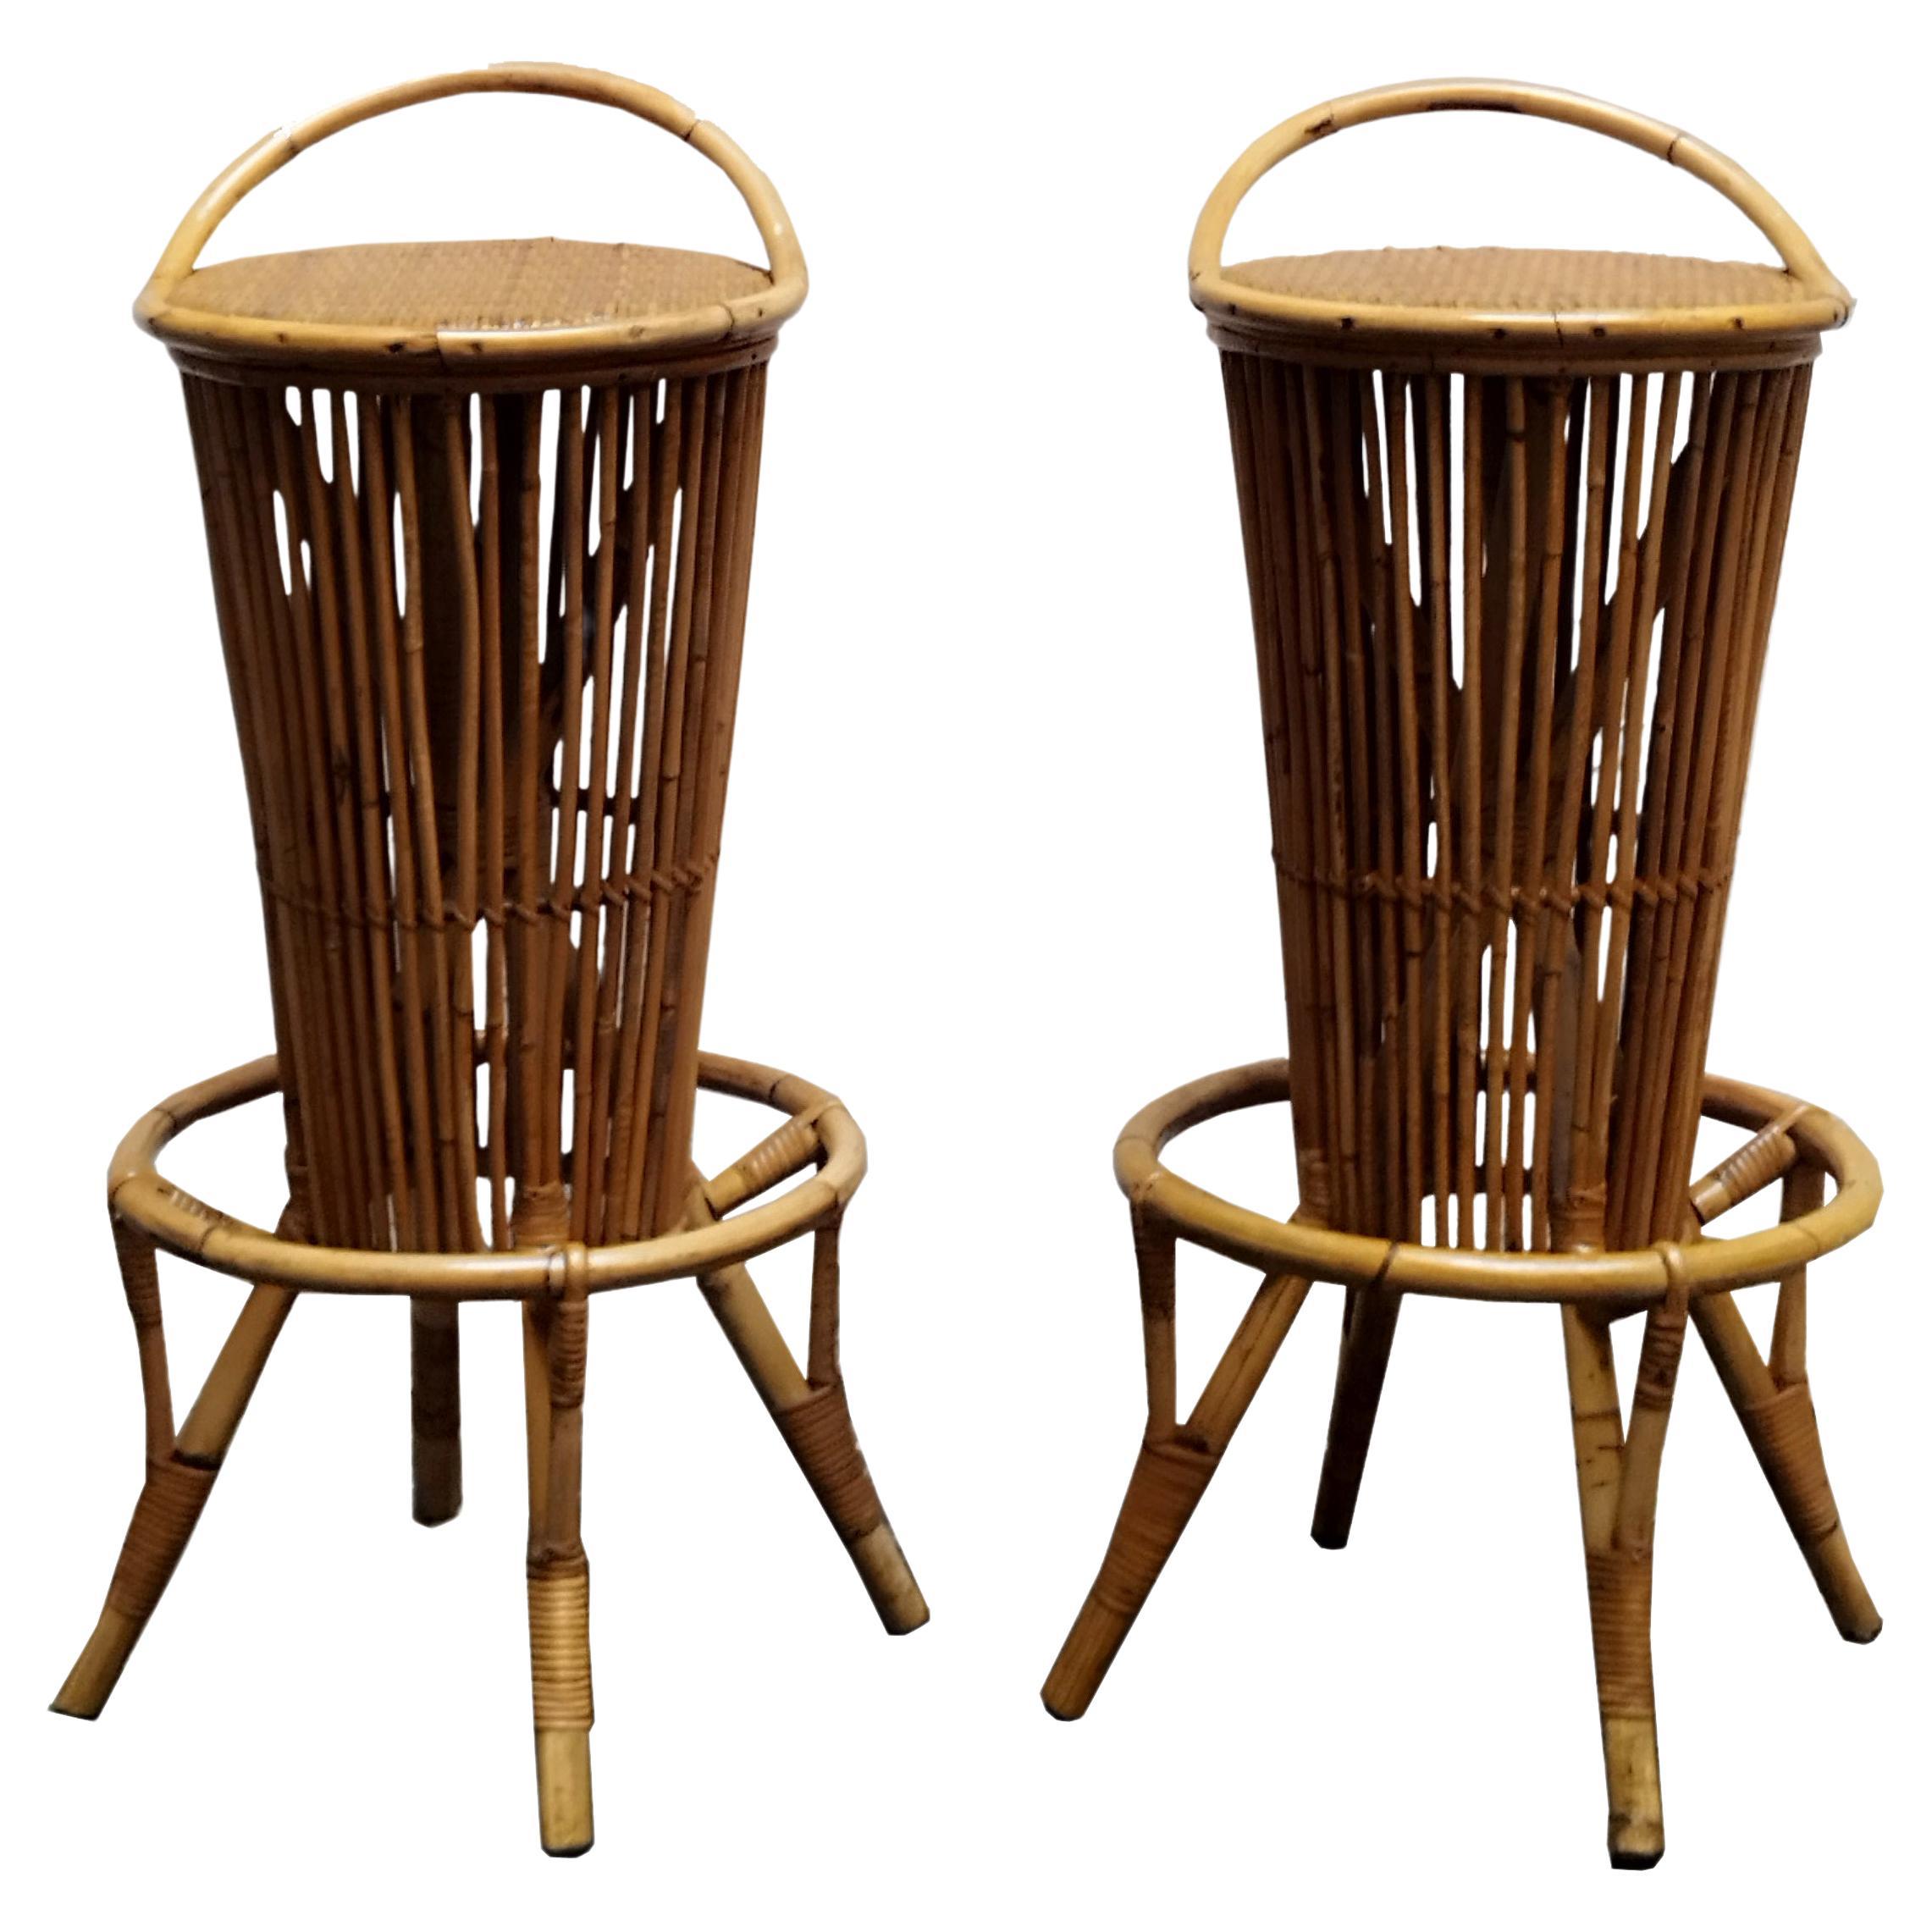 Tito Agnoli Attrib. Pair of Bamboo and Rattan Bar Stools, Italy 1960s For Sale